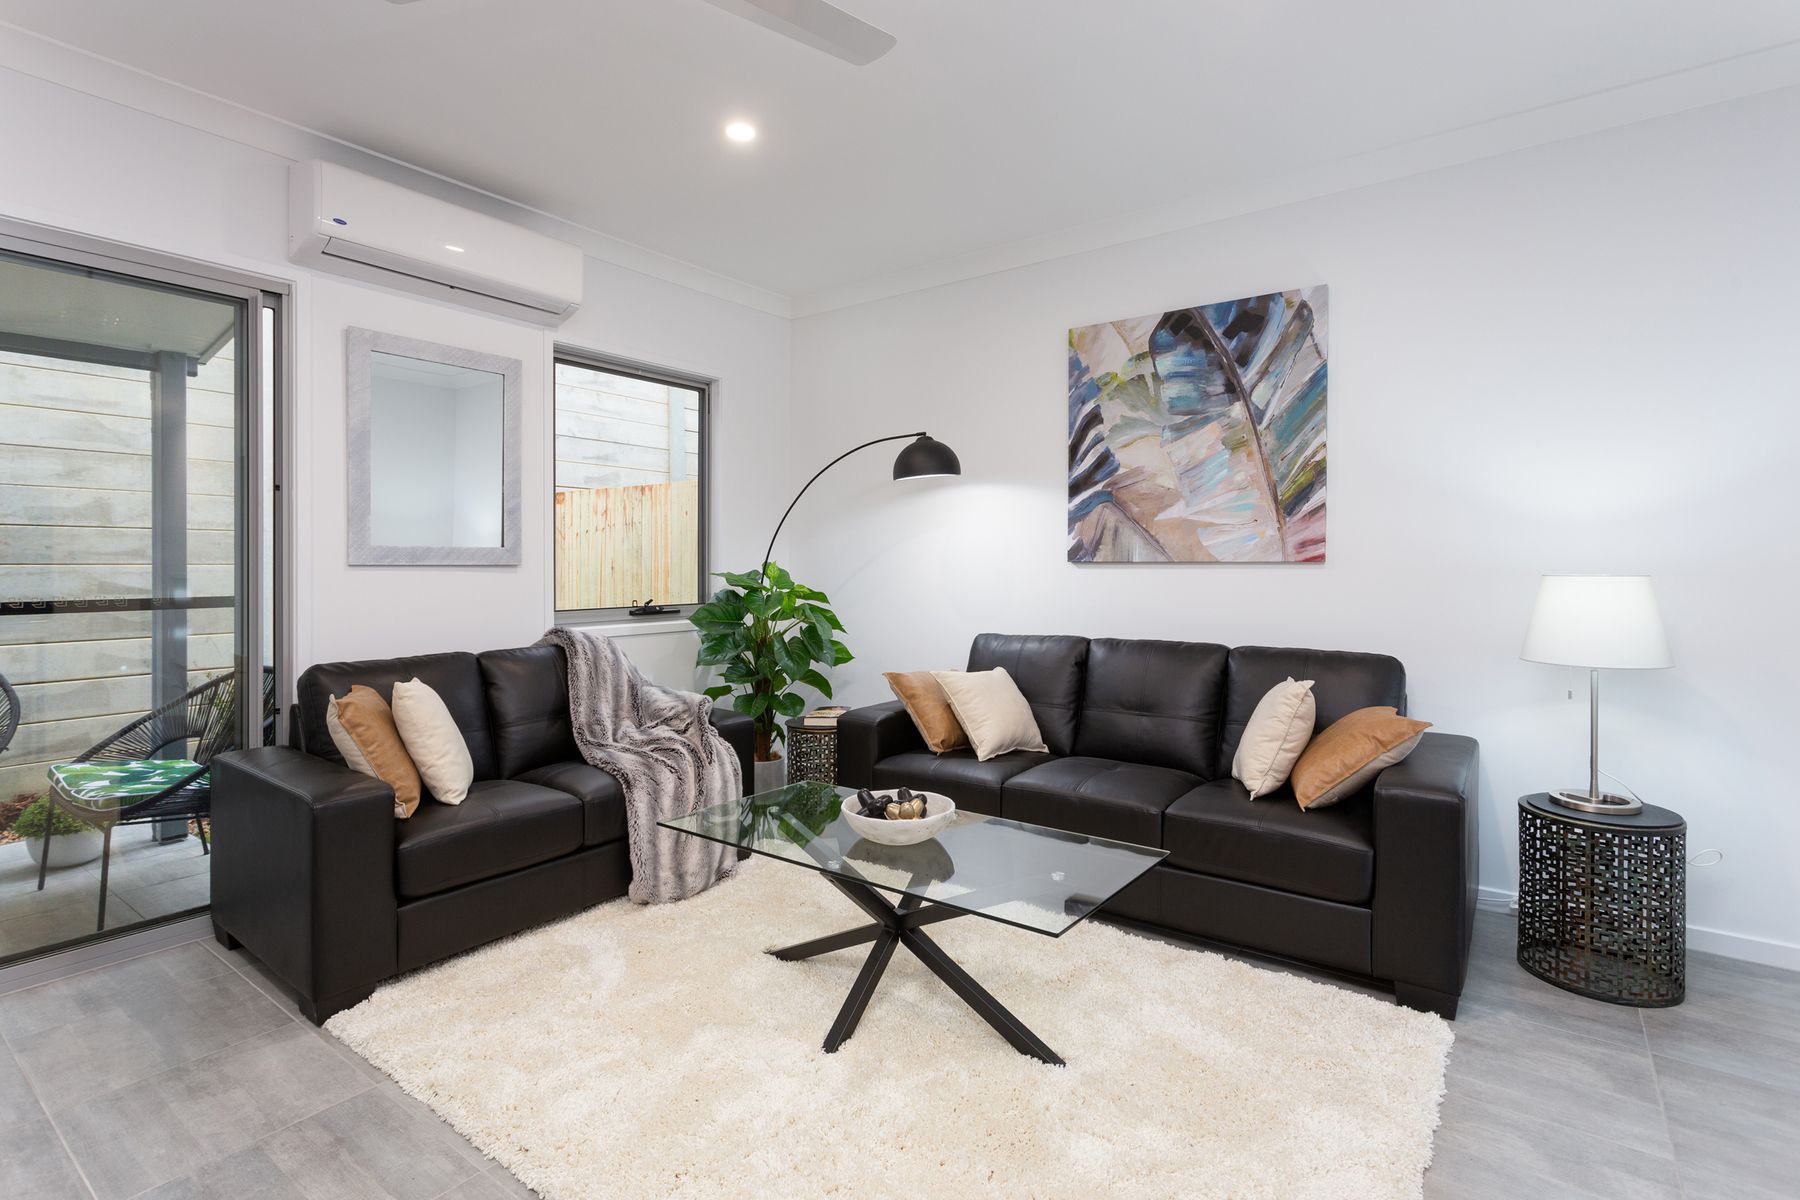 31 jotown drive coomera   Alessia Tang Area specialist 15